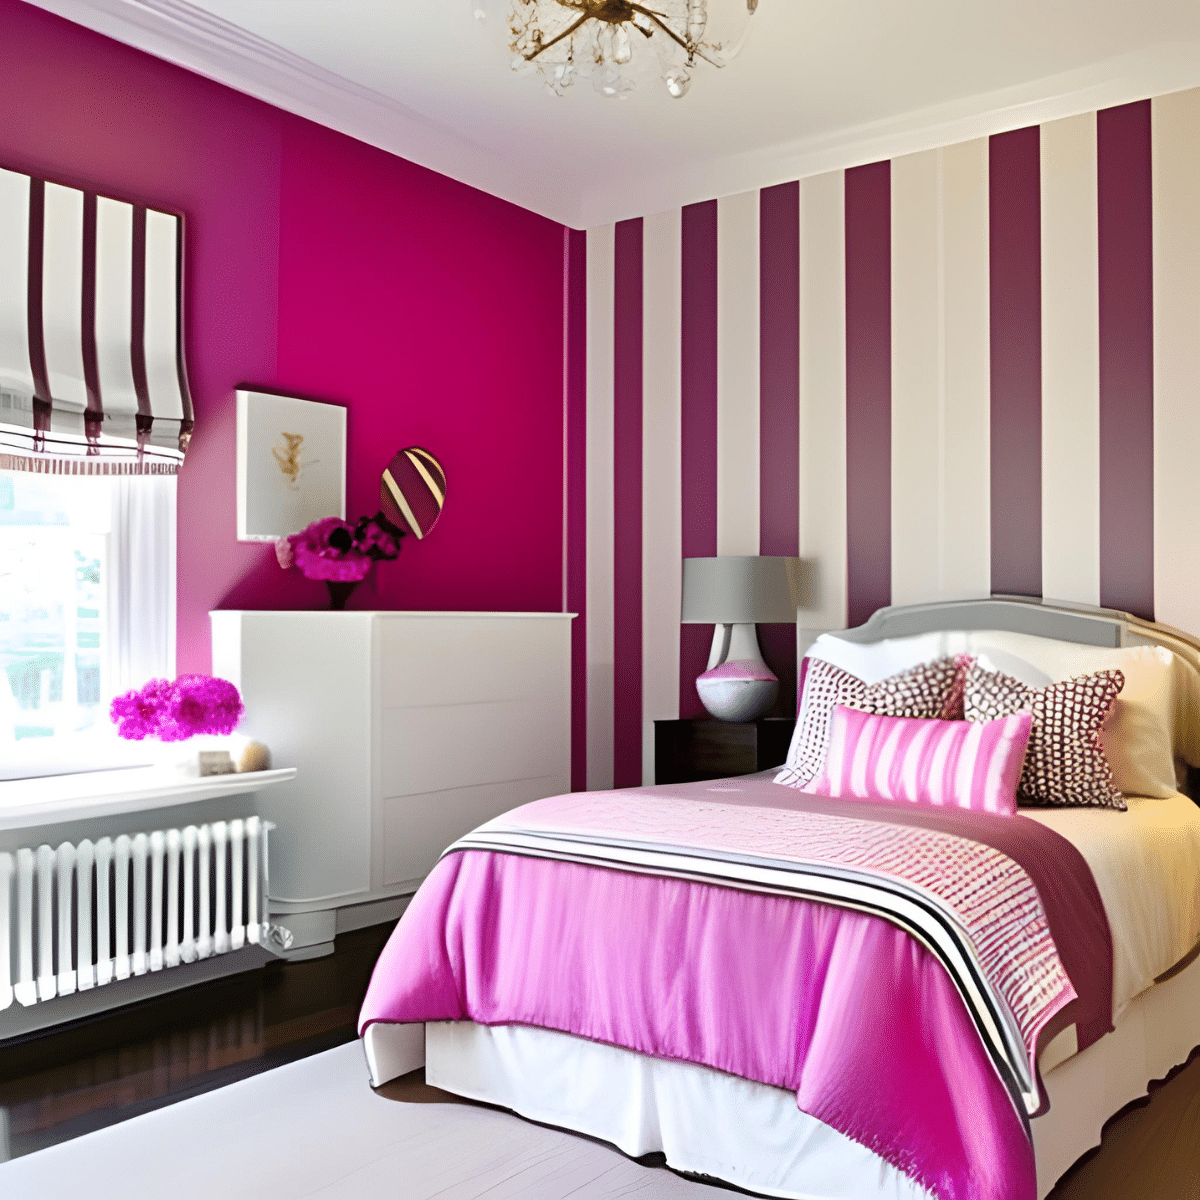 Bedroom with pink bed and purple striped walls